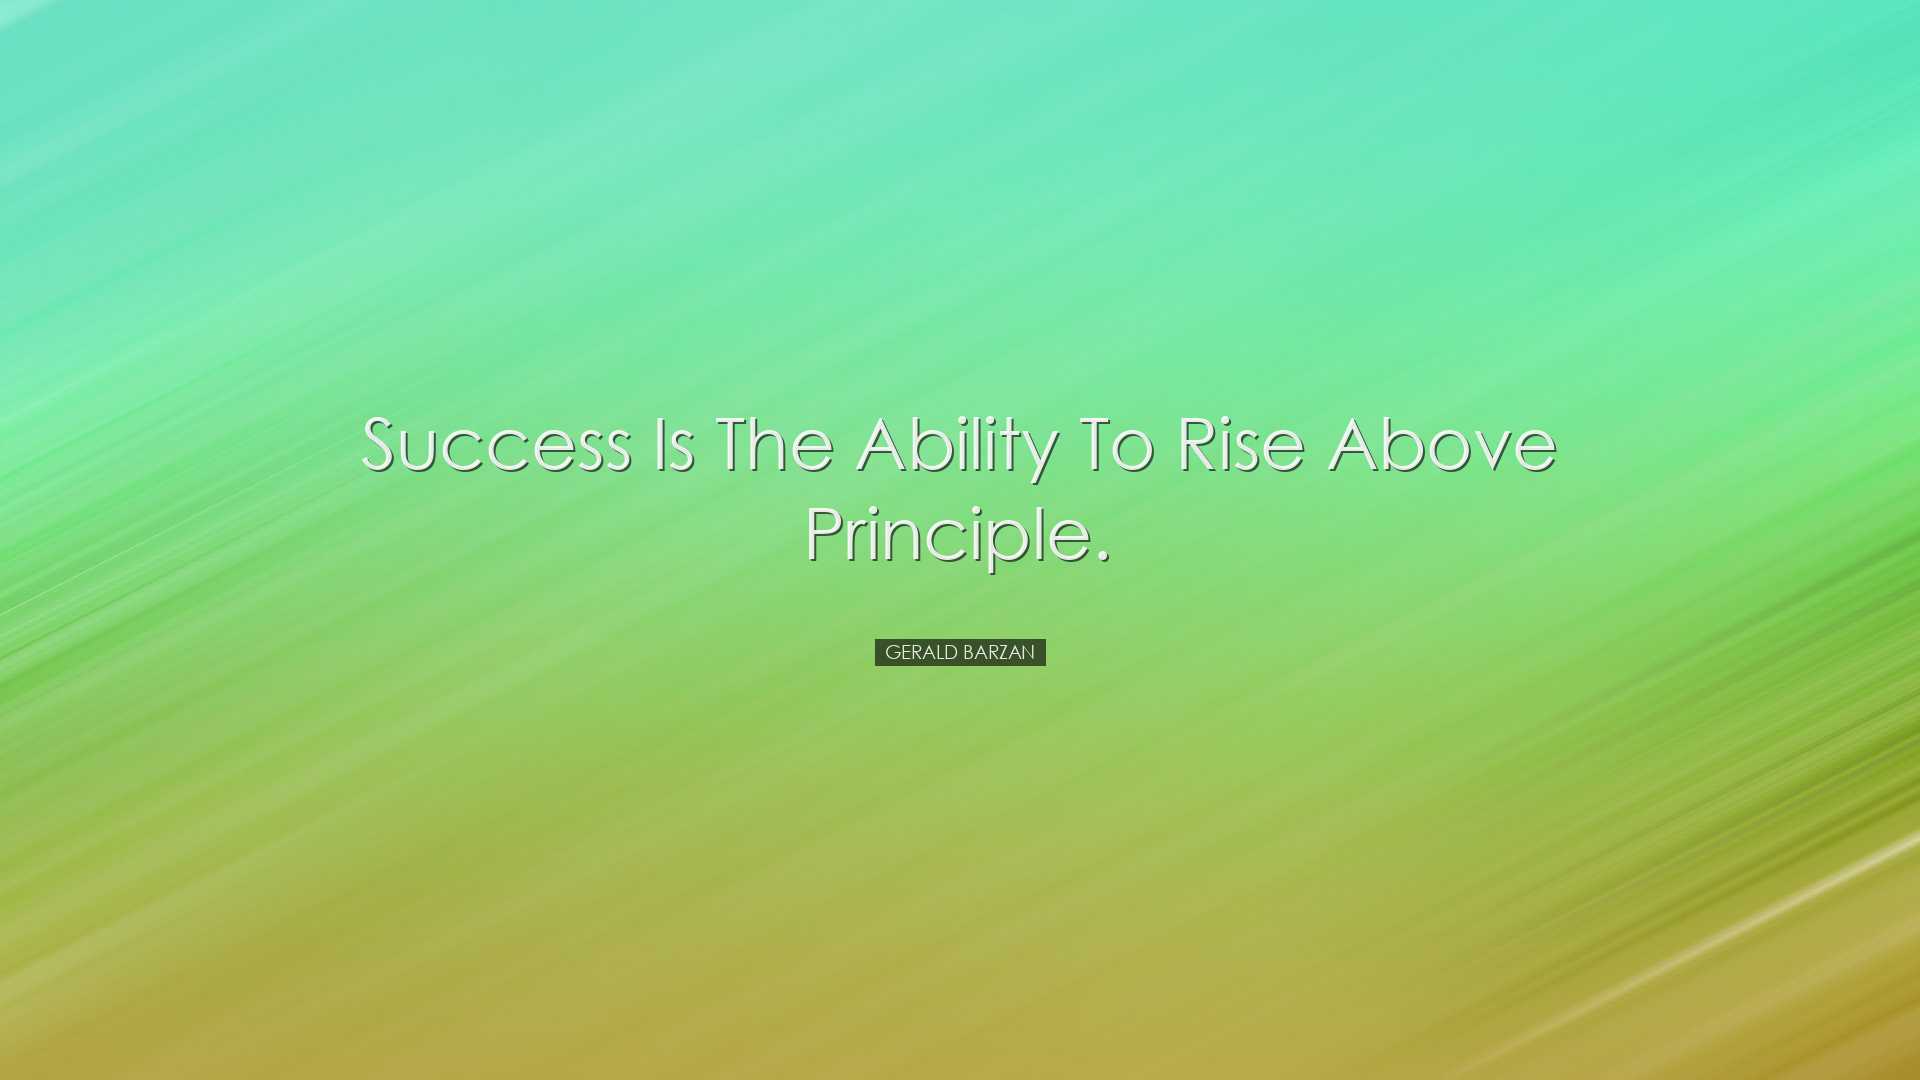 Success is the ability to rise above principle. - Gerald Barzan